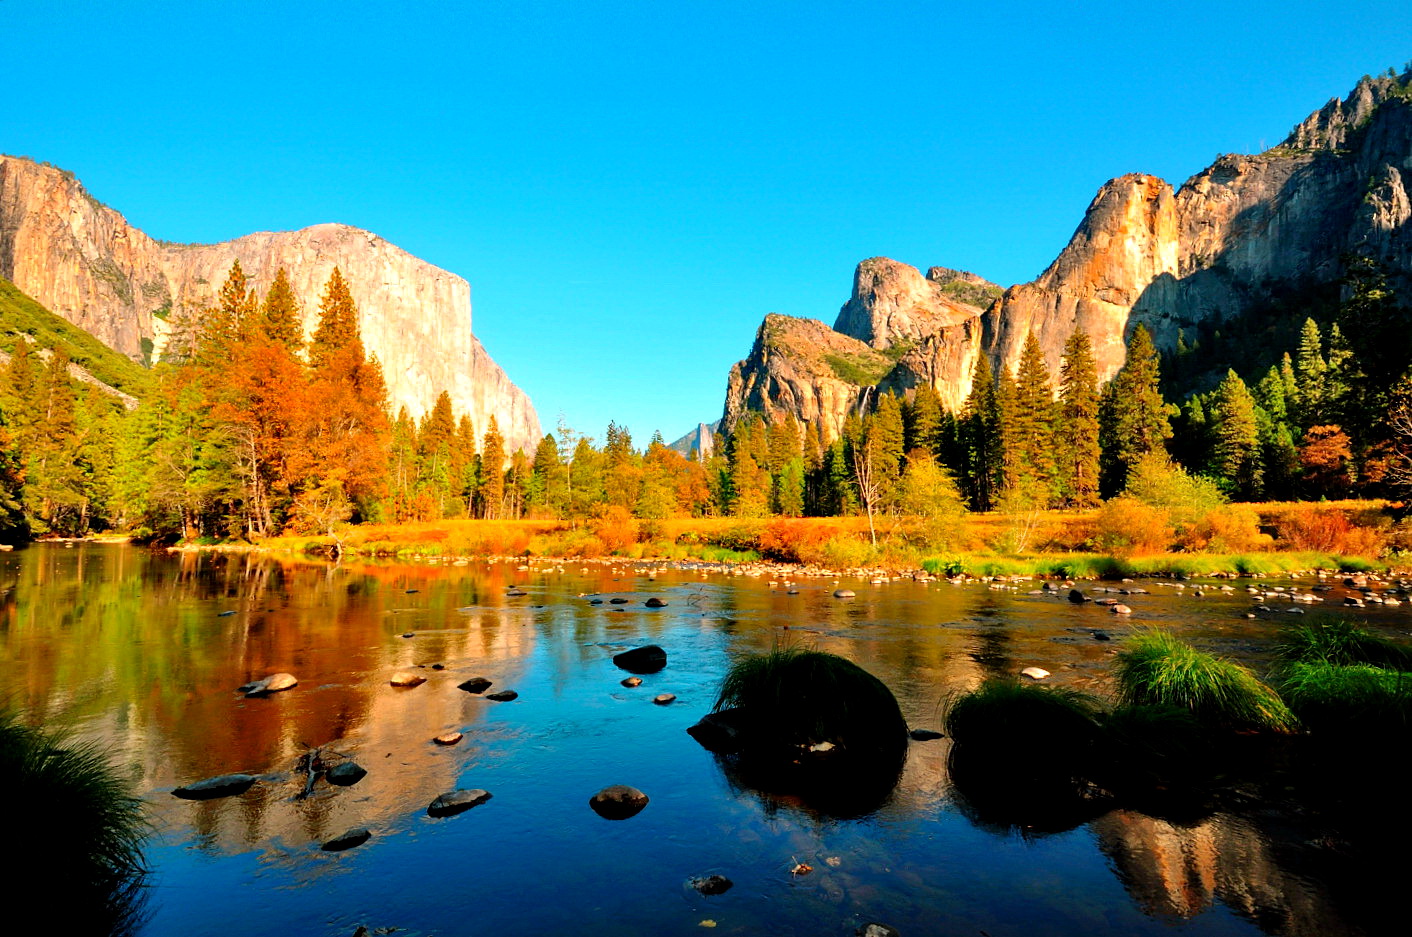 Yosemite National Park - Most Breathtaking National Parks to Visit for Fall Colors